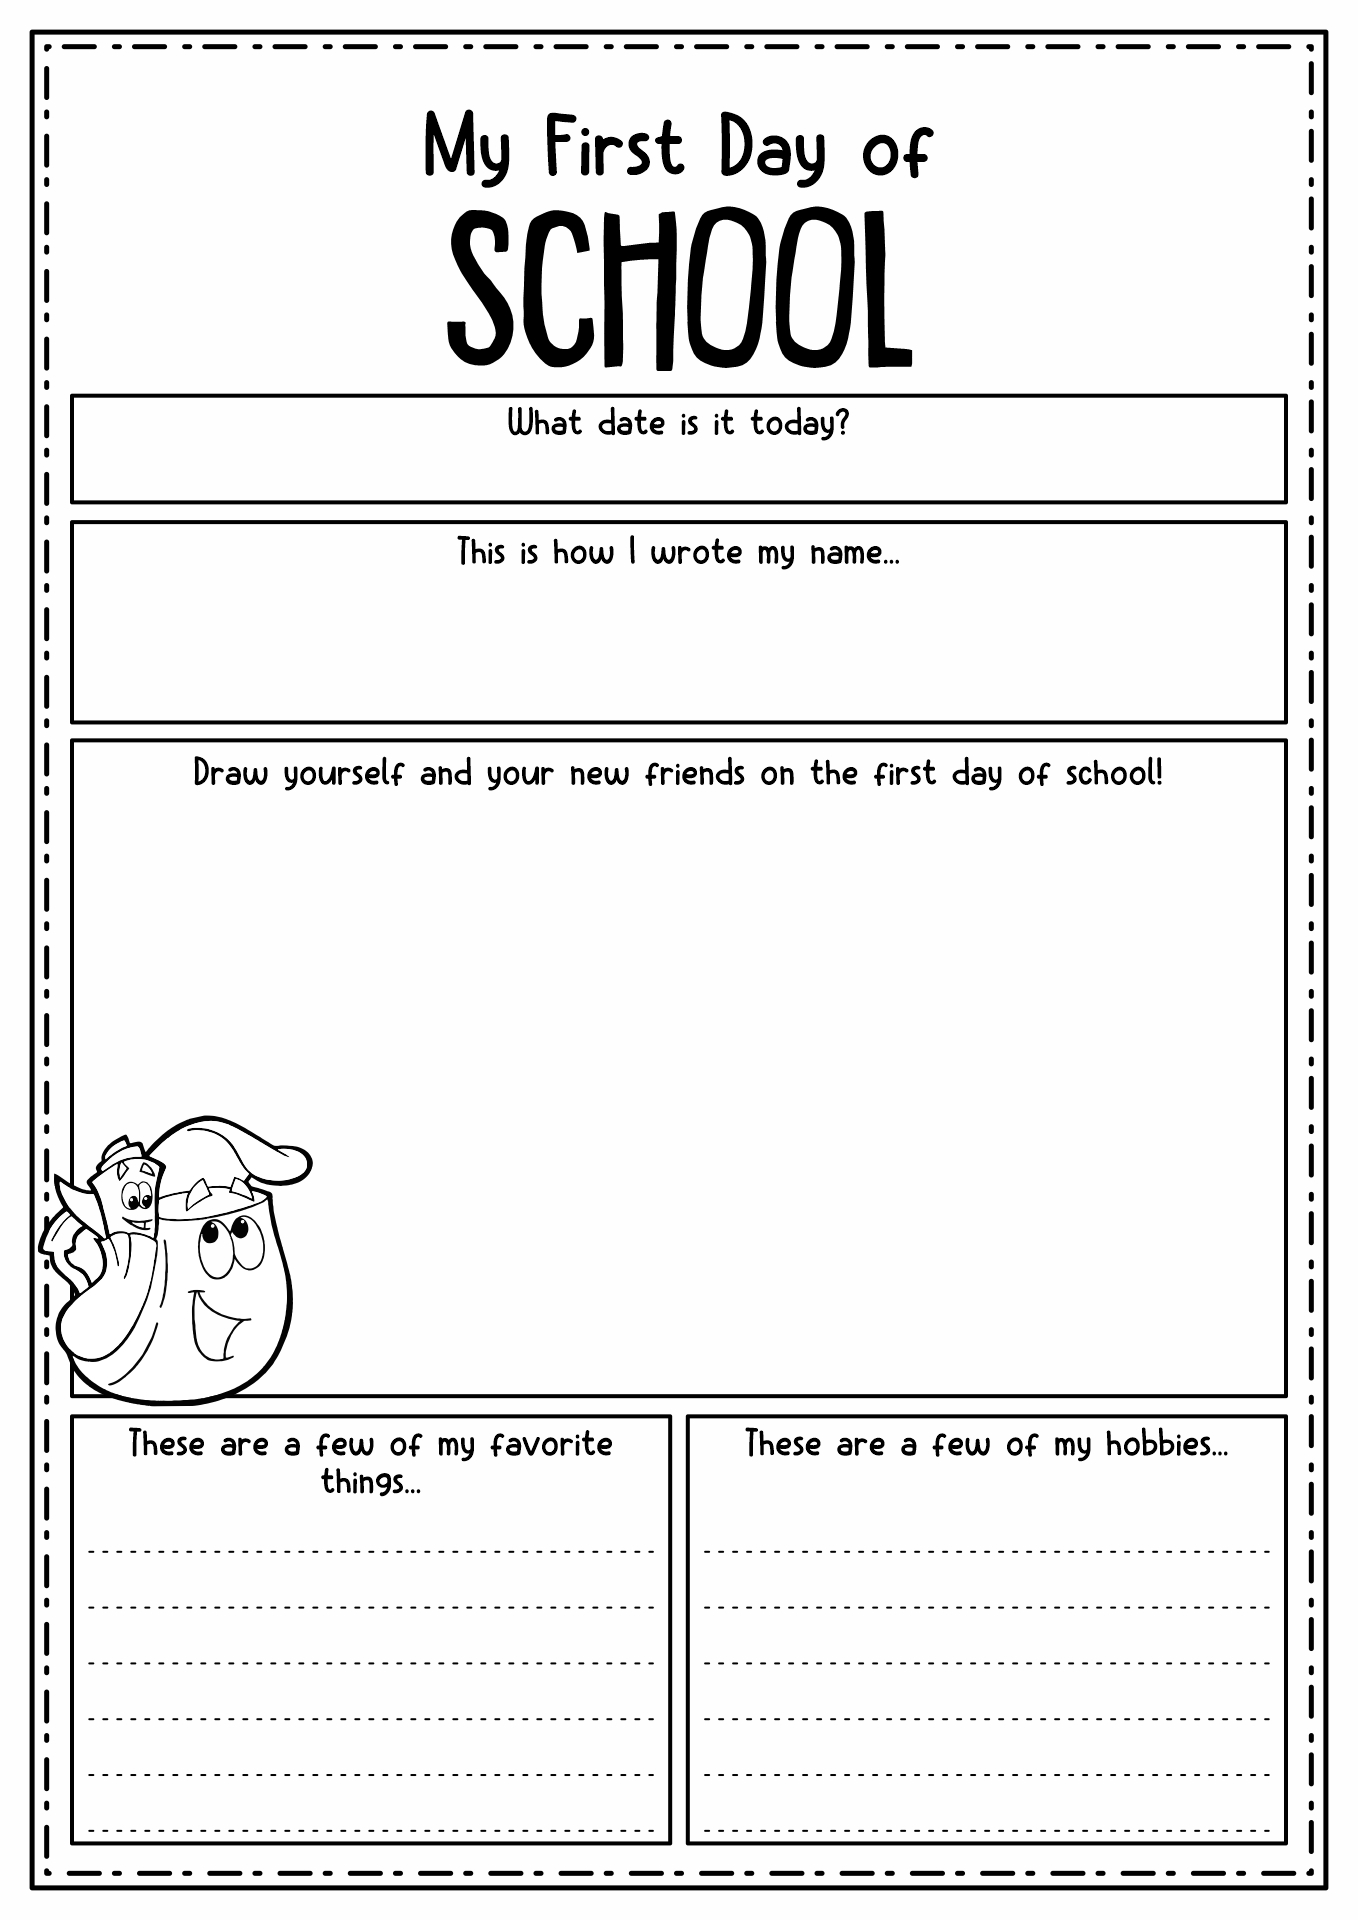 First Day of School Activities 1st Grade Image